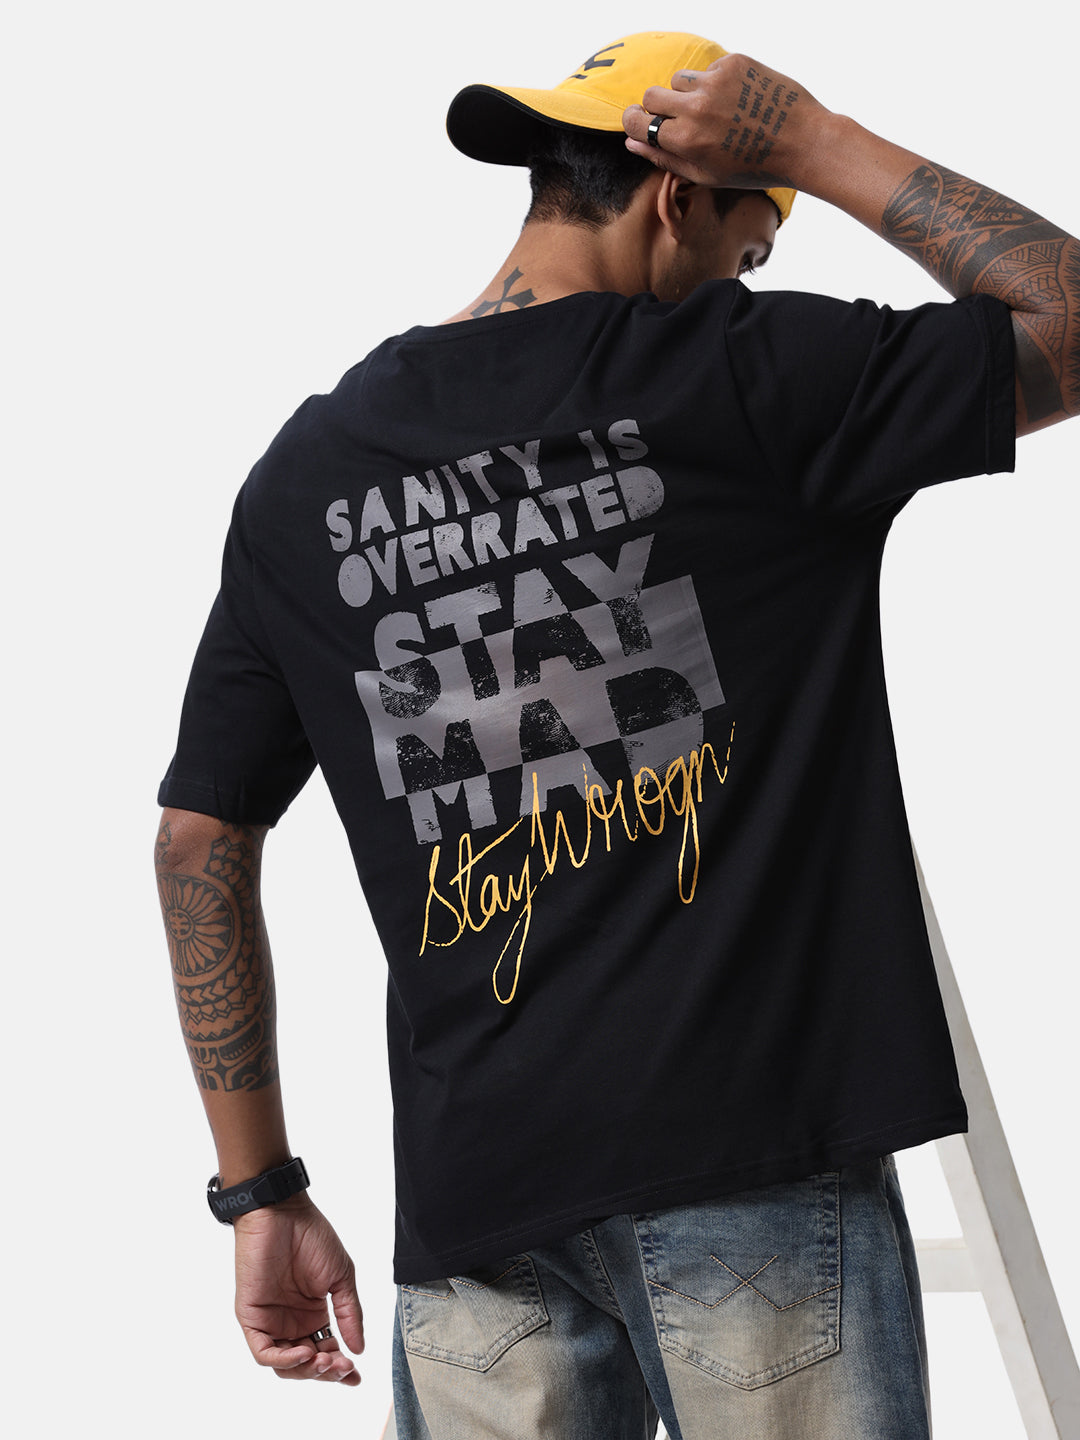 Sanity Is Overrated Black Printed T-Shirt